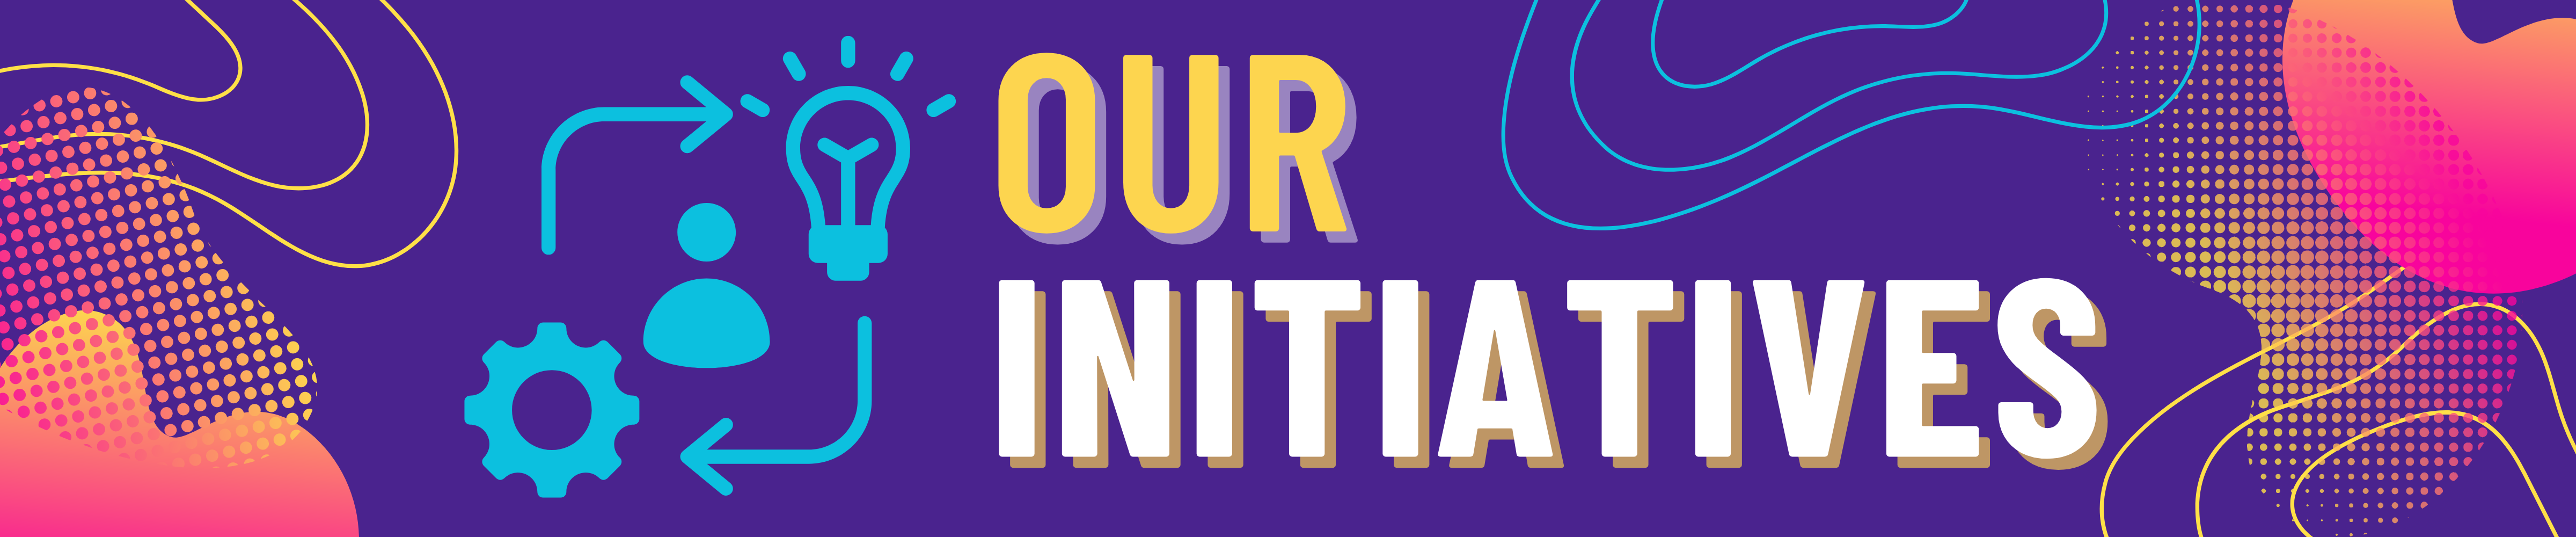 A Digital banner with a dark purple background and bright blob shapes in the corners that fade from fuchsia to gold. There are yellow topographic lines as accents. A stylized graphic of a person encircled by arrows moving between a light bulb and a cog is turquoise on the left side. To the right, in yellow and white letters, read “Our Initiatives.”